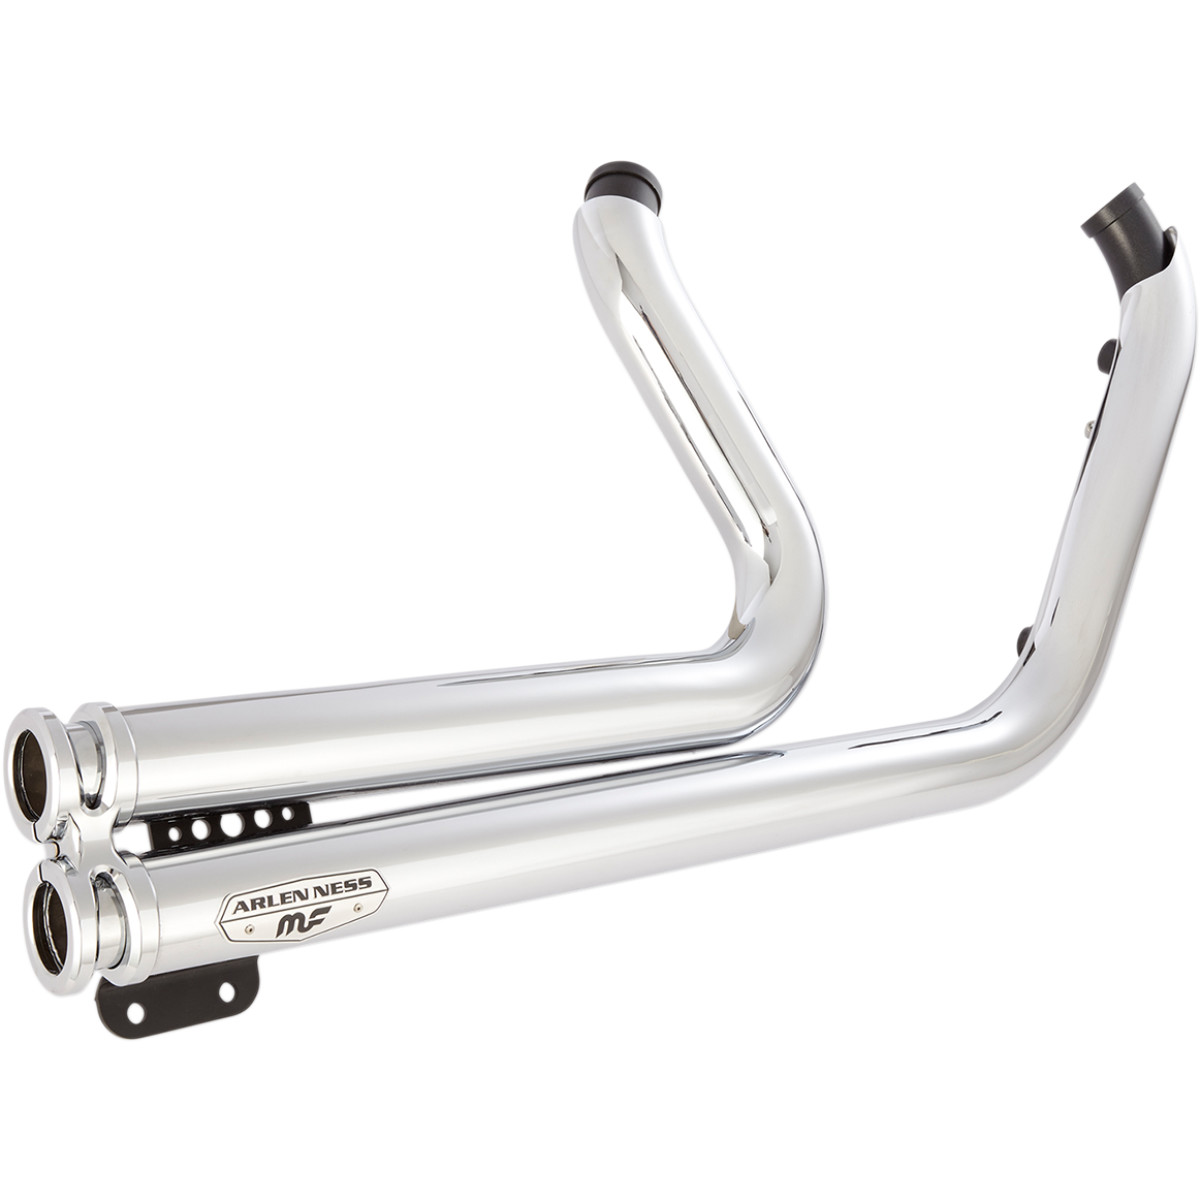 HARLEY DAVIDSON FXST, FLST COMPLETE EXHAUST SYSTEM LOWDOWN 2-INTO-2 STAINLESS STEEL CHROME